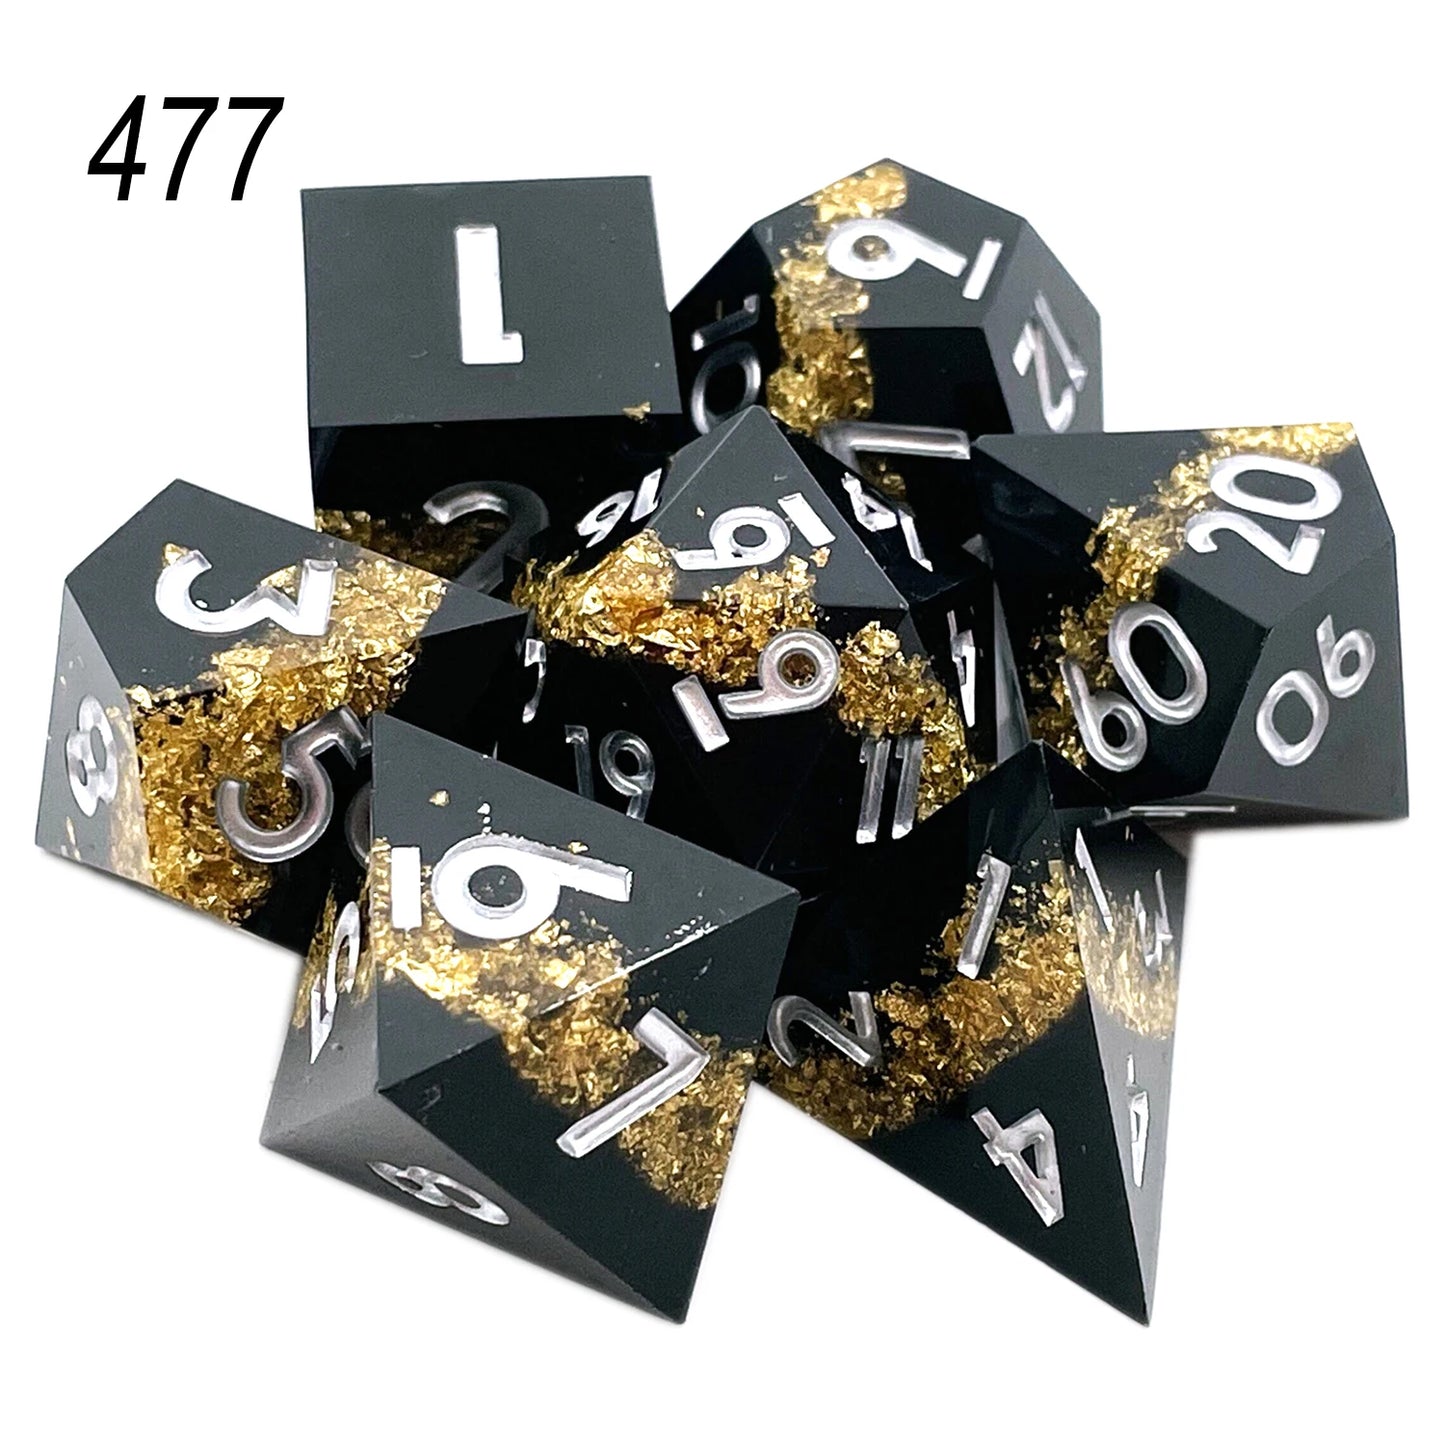 2023 Resin Dice 7PCs Dnd Set Solid Polyhedral D&D Dice DND For Role Playing Rpg Rol Pathfinder Board Game Dragon Scale Gifts 477